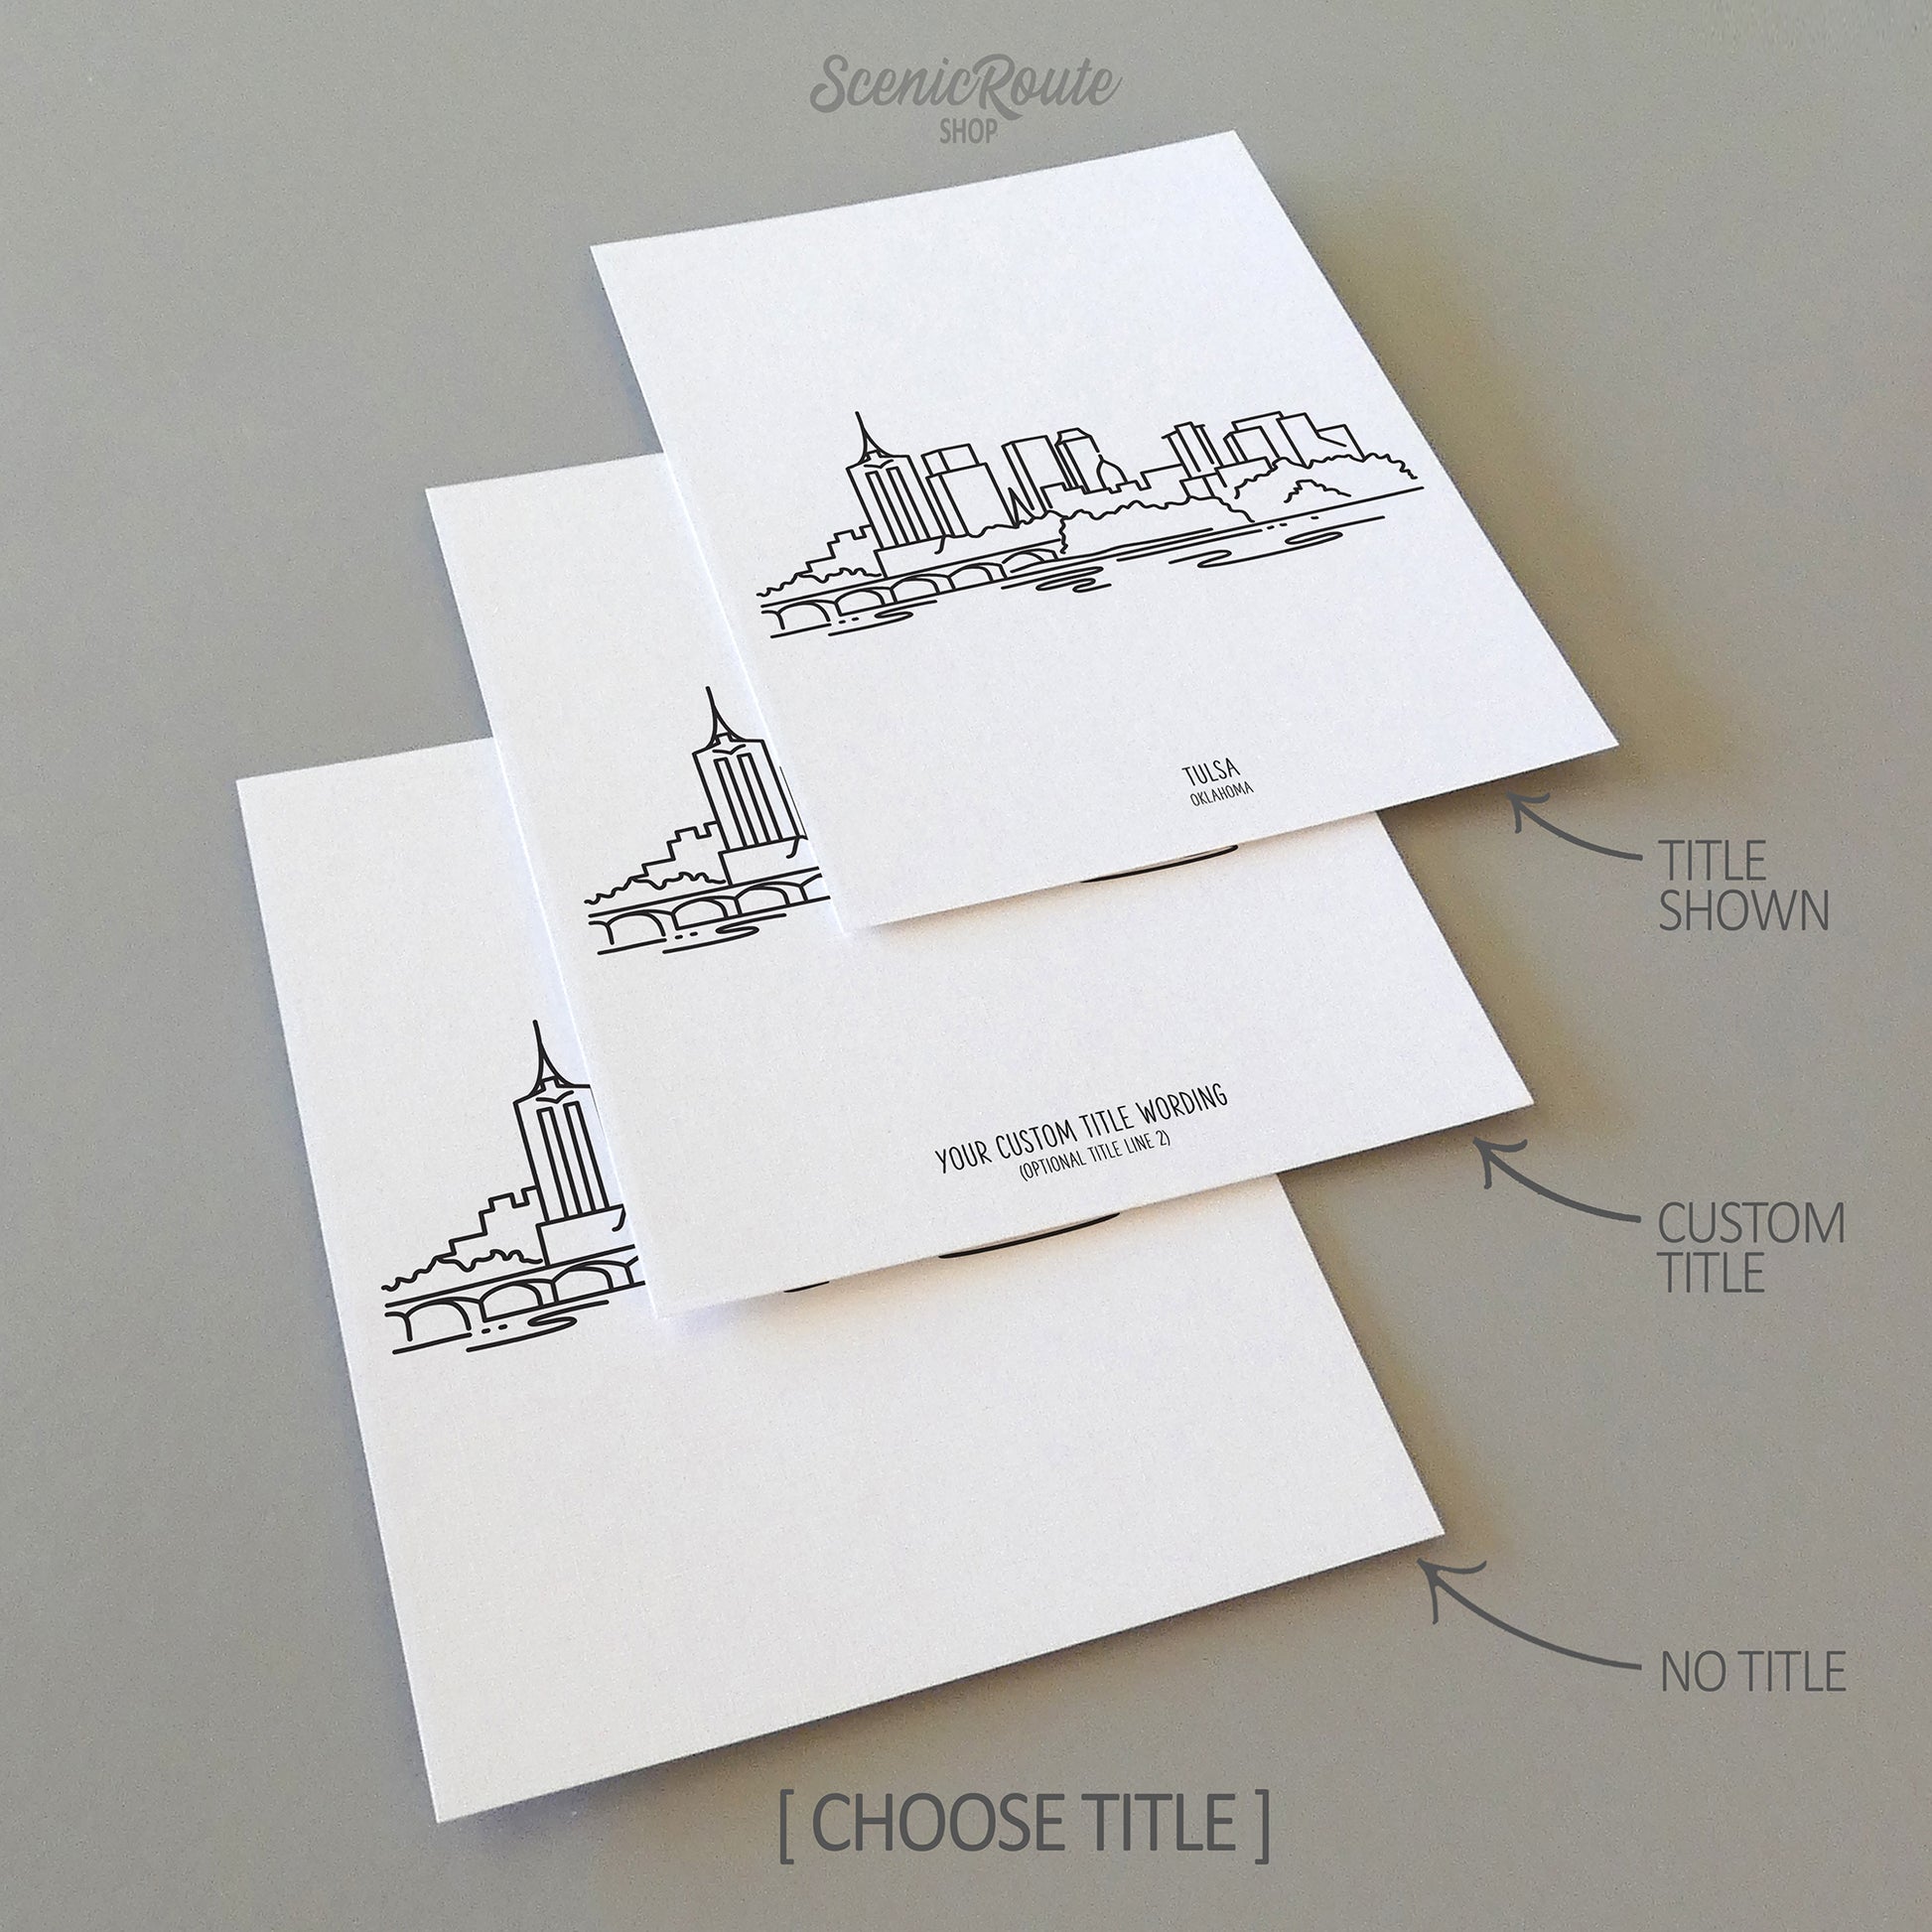 Three line art drawings of the Tulsa Oklahoma Skyline on white linen paper with a gray background. The pieces are shown with title options that can be chosen and personalized.